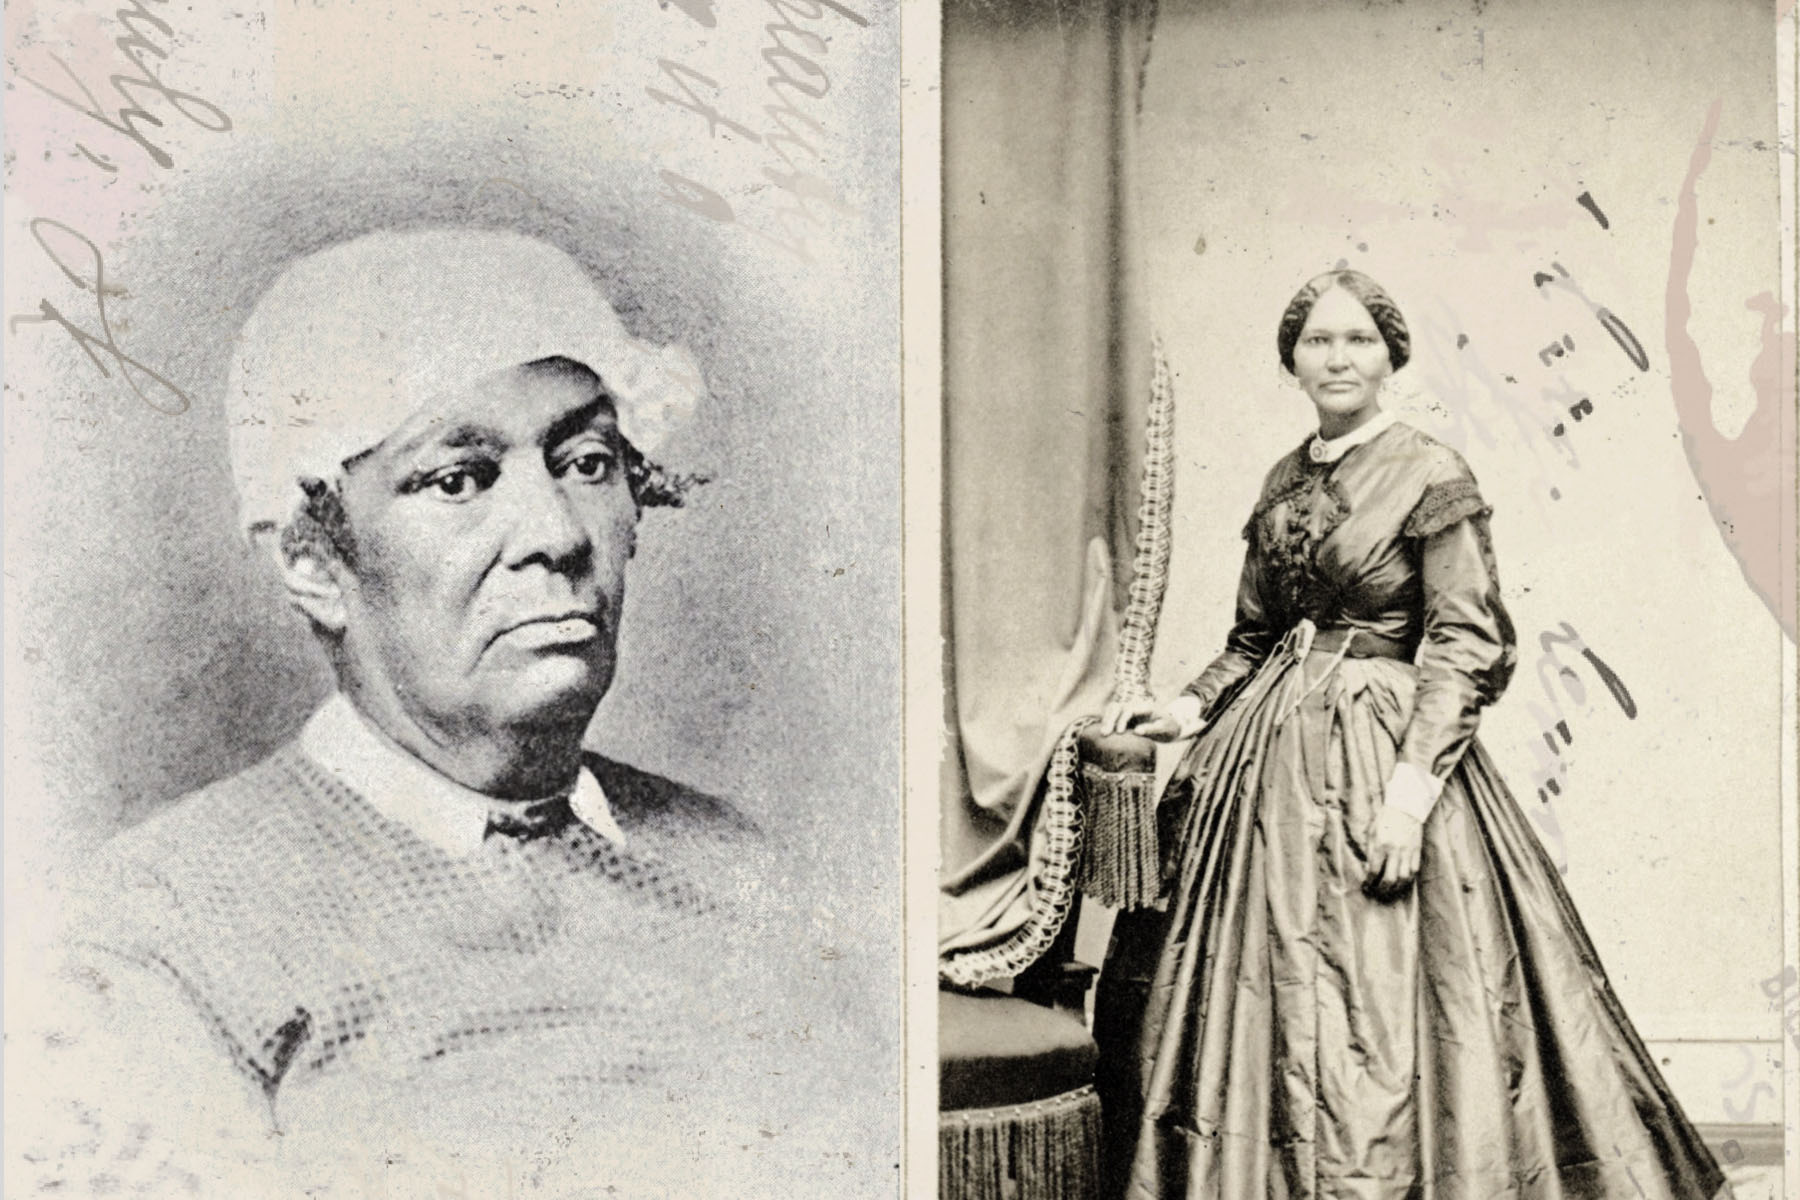 The truth about the women this Florida board says benefited from slavery